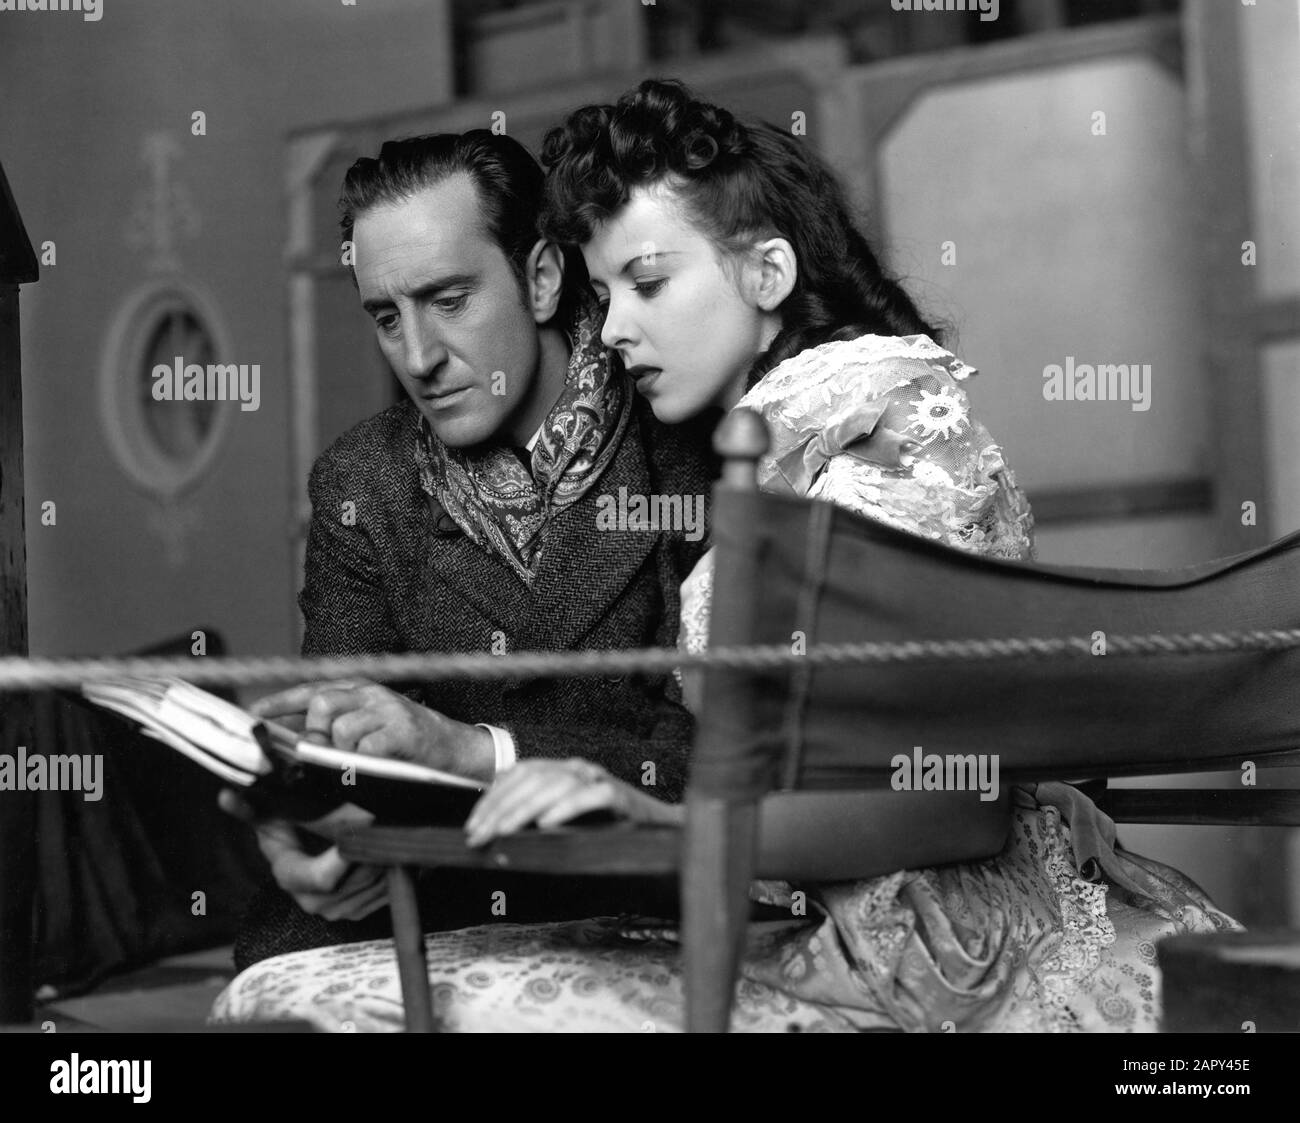 BASIL RATHBONE as Sherlock Holmes and IDA LUPINO on set candid during filming of THE ADVENTURES OF SHERLOCK HOLMES 1939 director ALFRED L. WERKER characters created by ARTHUR CONAN DOYLE Twentieth Century Fox Stock Photo